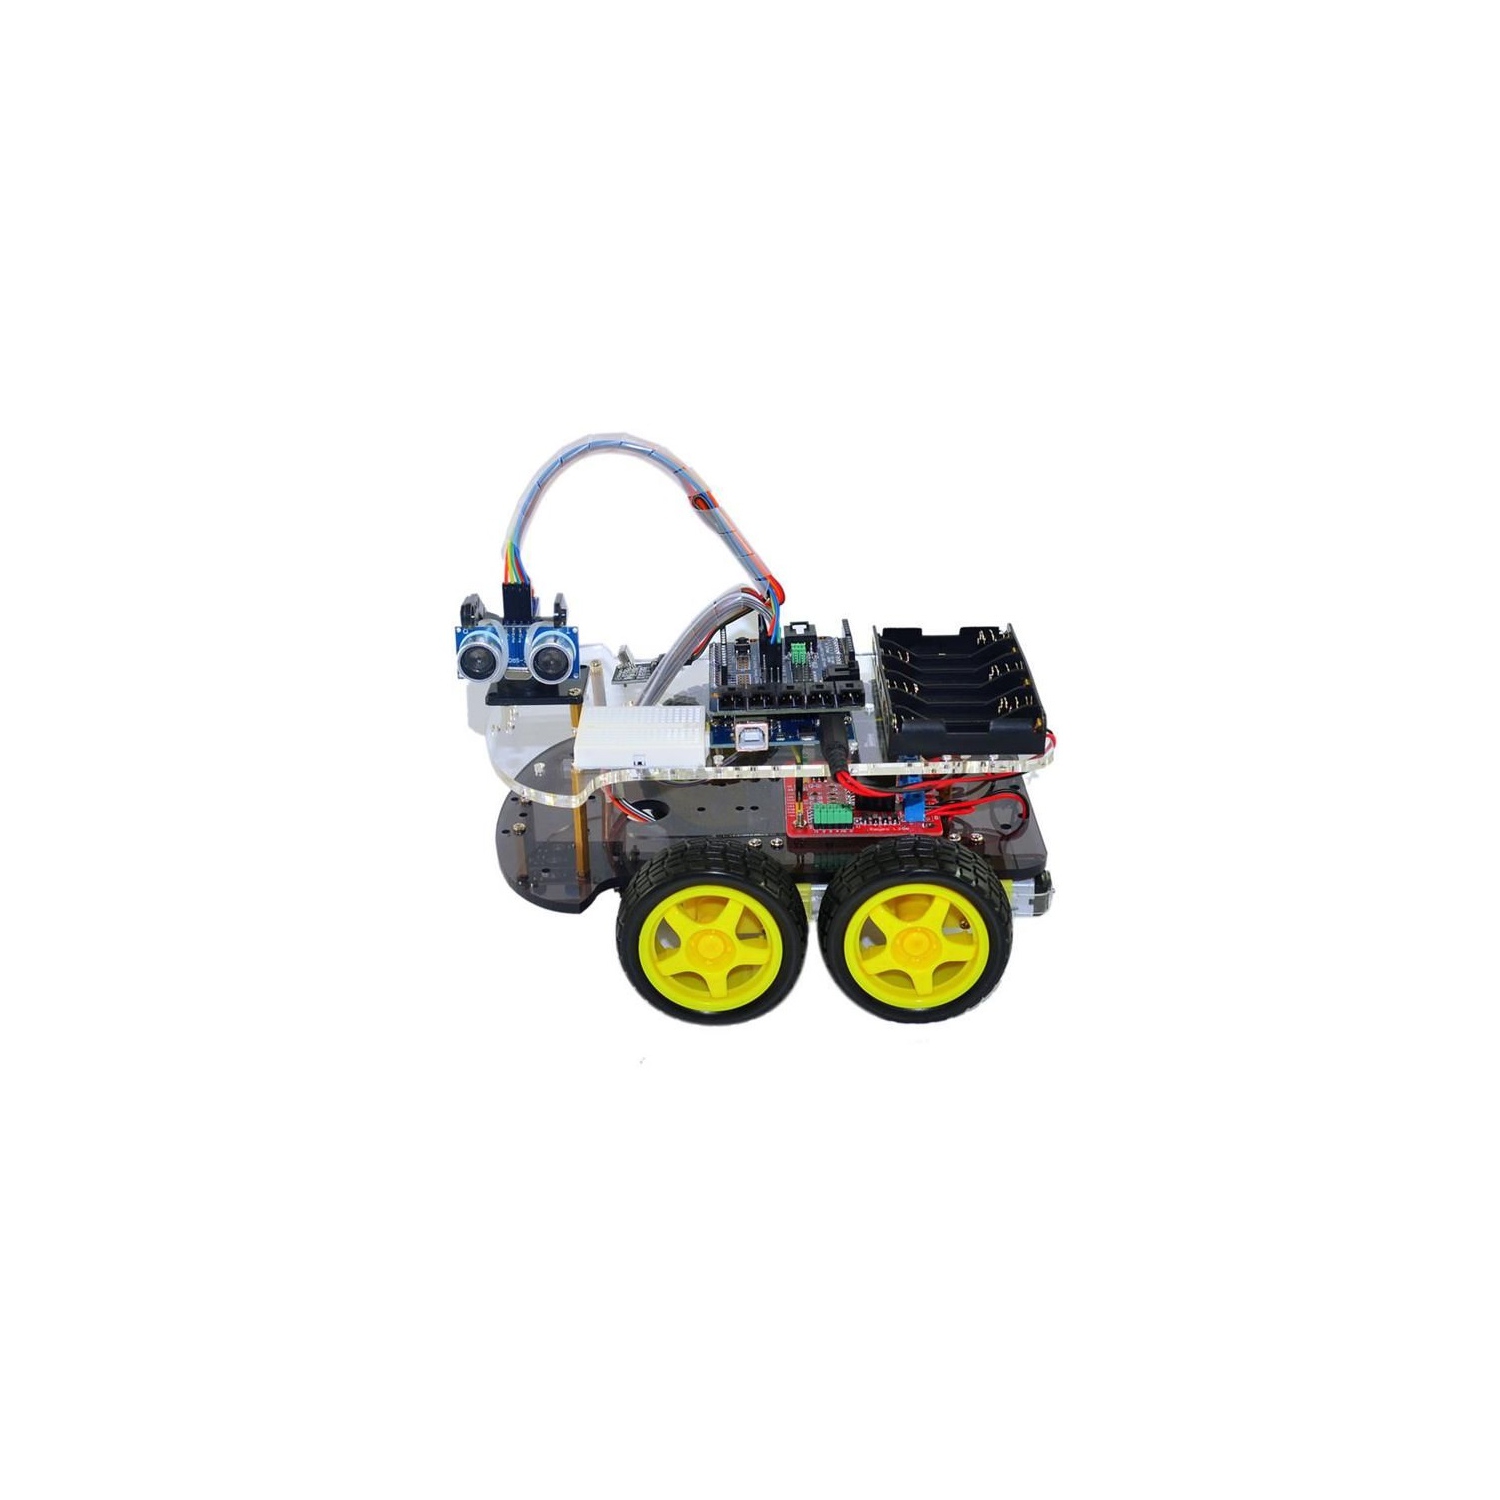 DIY MULTI-FUNCTIONAL 4WD Educational Toy Car, Robotic Kit for Arduino Learner | External Circuit Modules - Easy to Use | Above 3 years toys